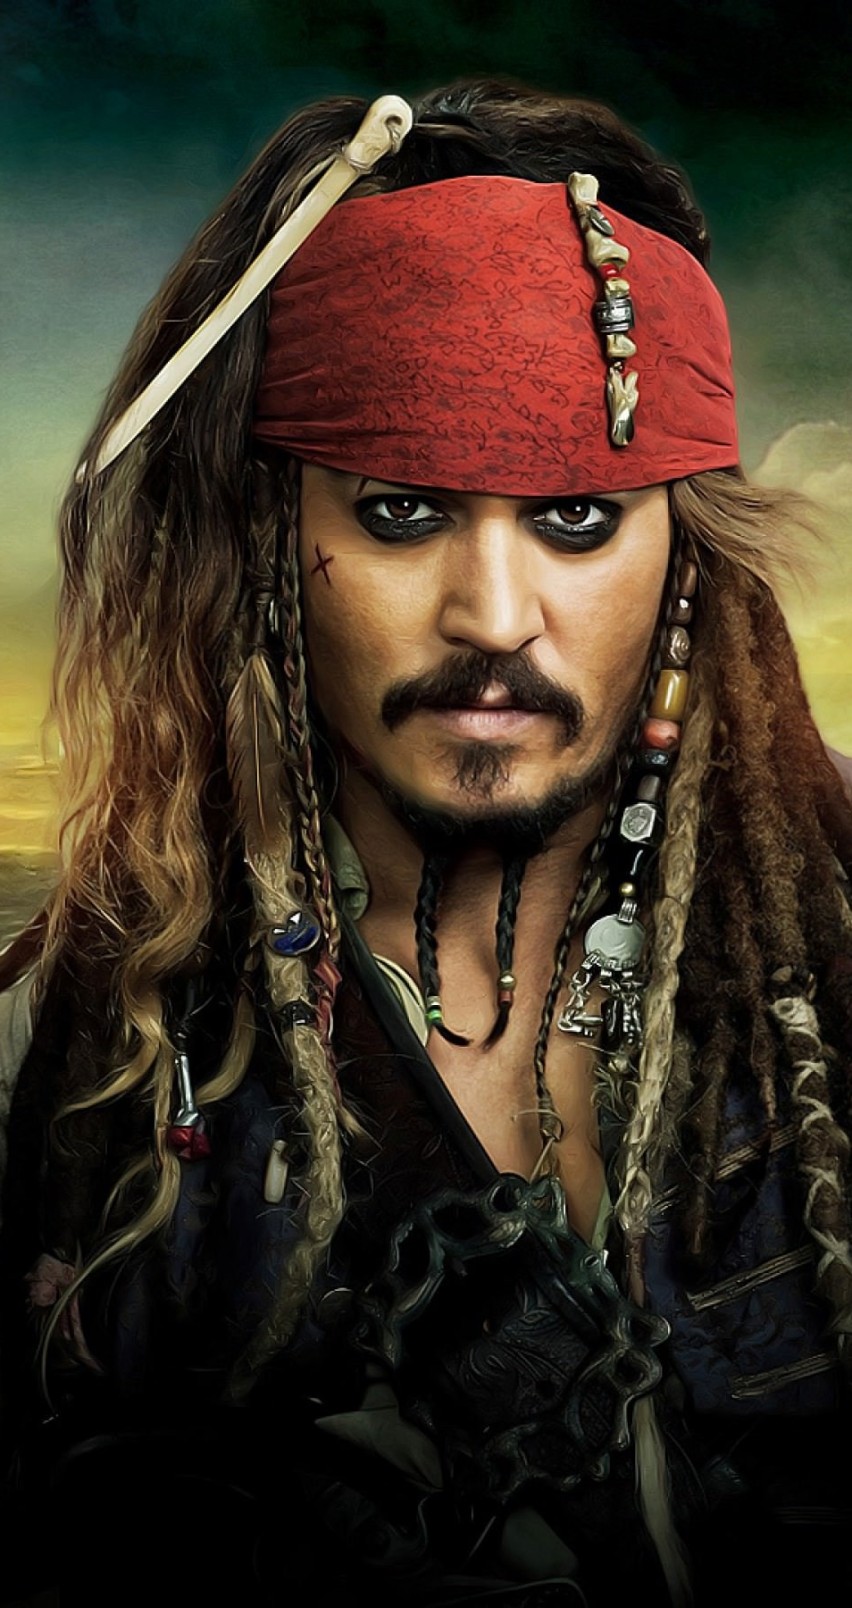 Jack Sparrow - Pirates Of The Caribbean Wallpaper for Apple iPhone 6 / 6s